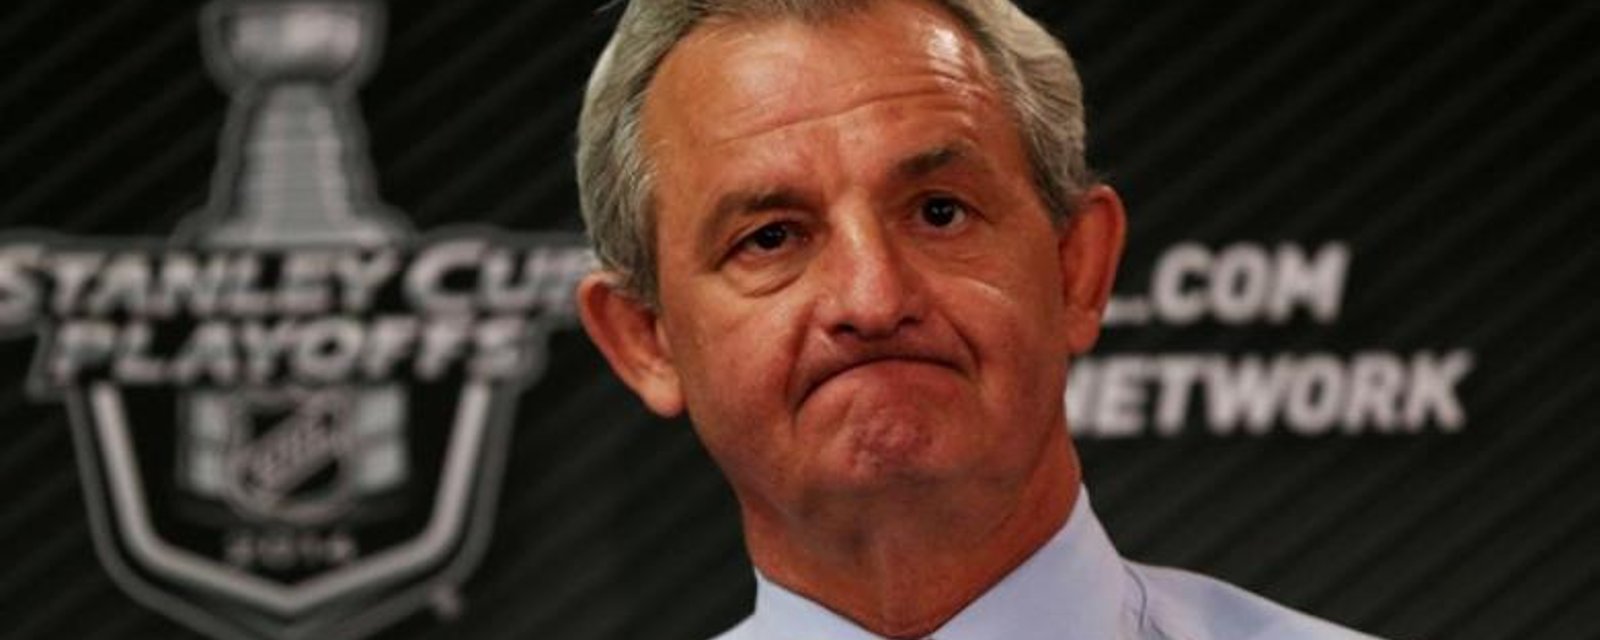 Darryl Sutter insists on his future with the Kings.